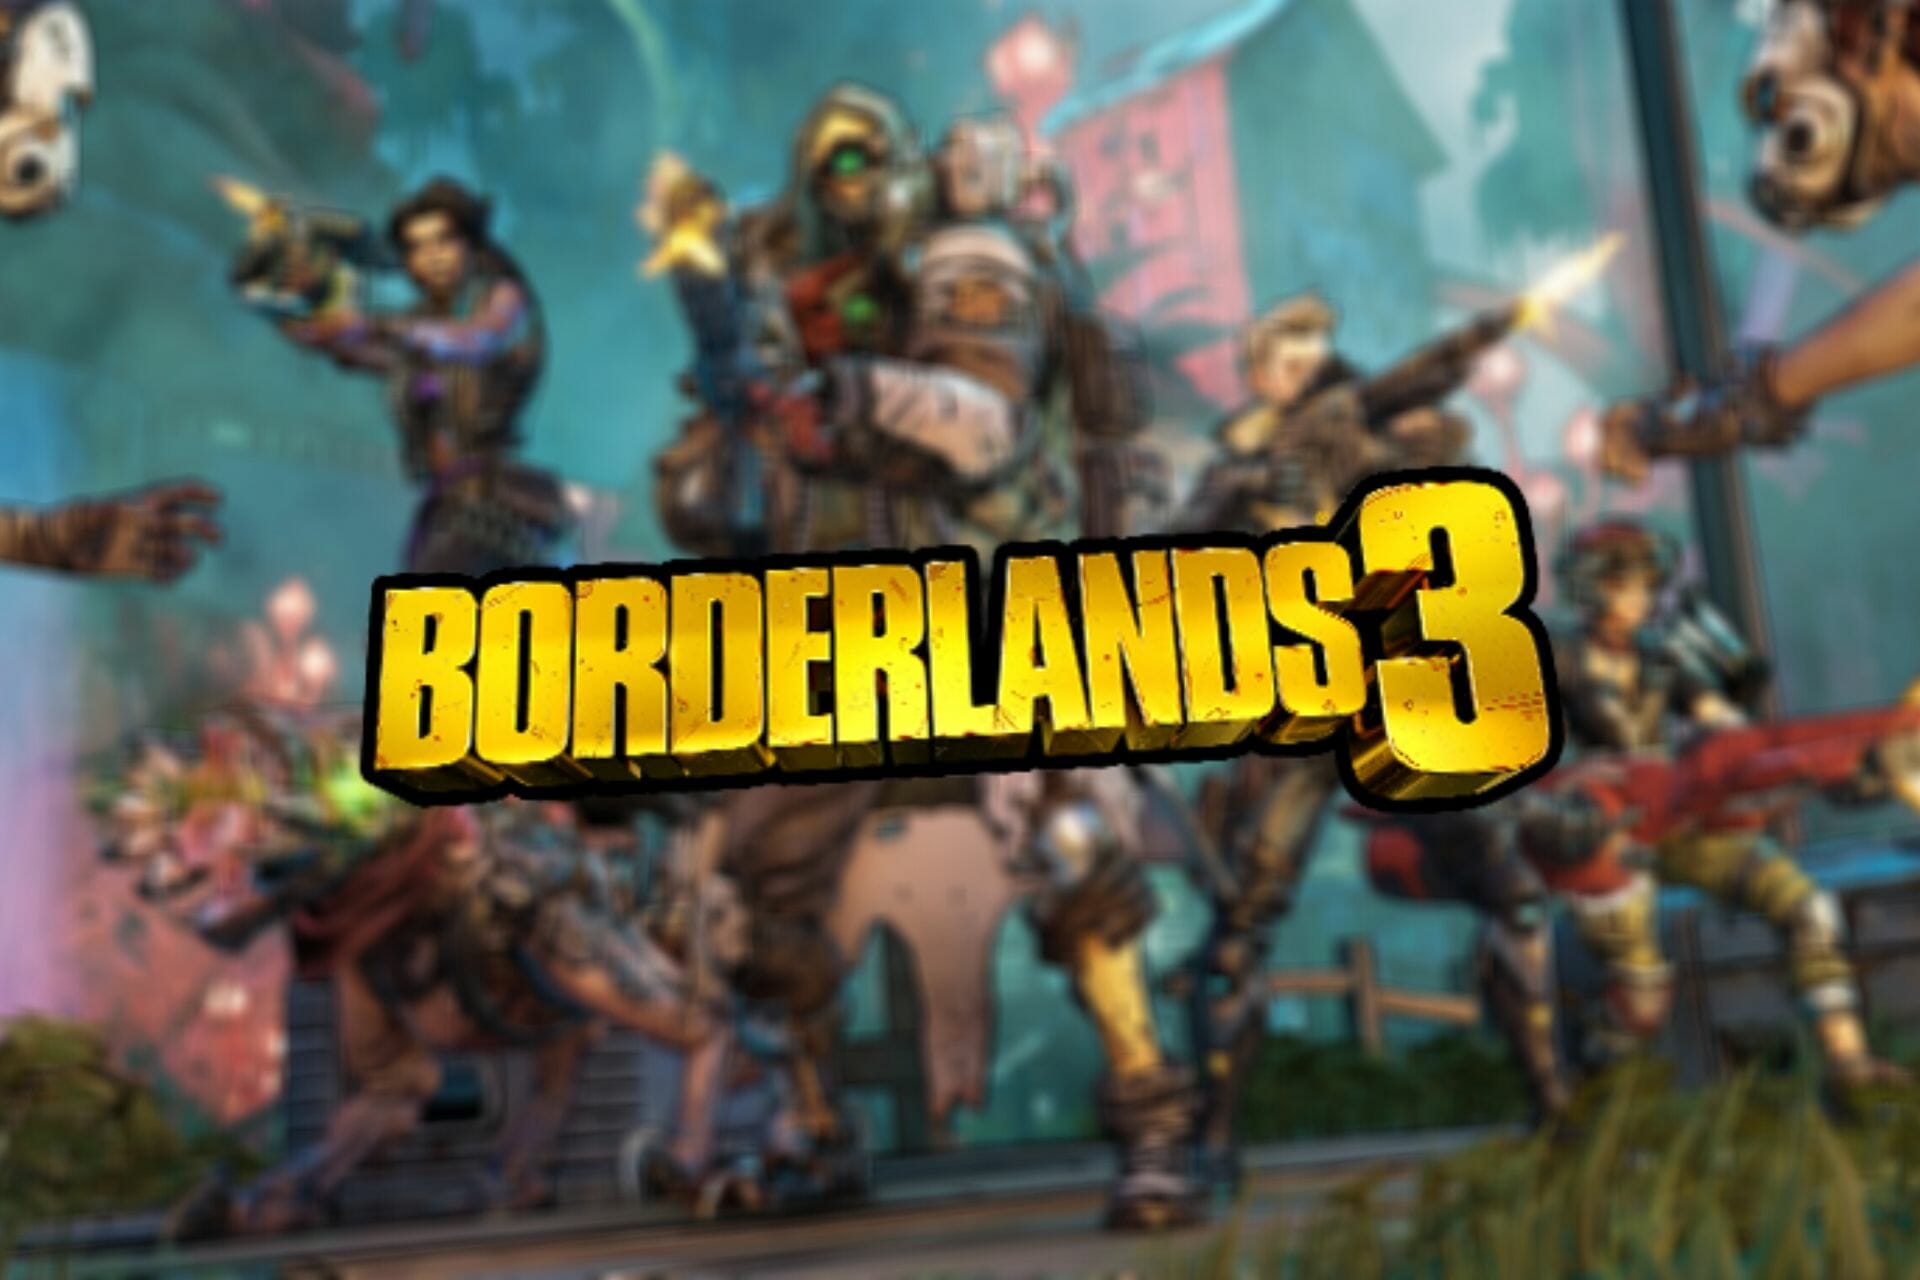 How to fix Borderlands 3 packet loss